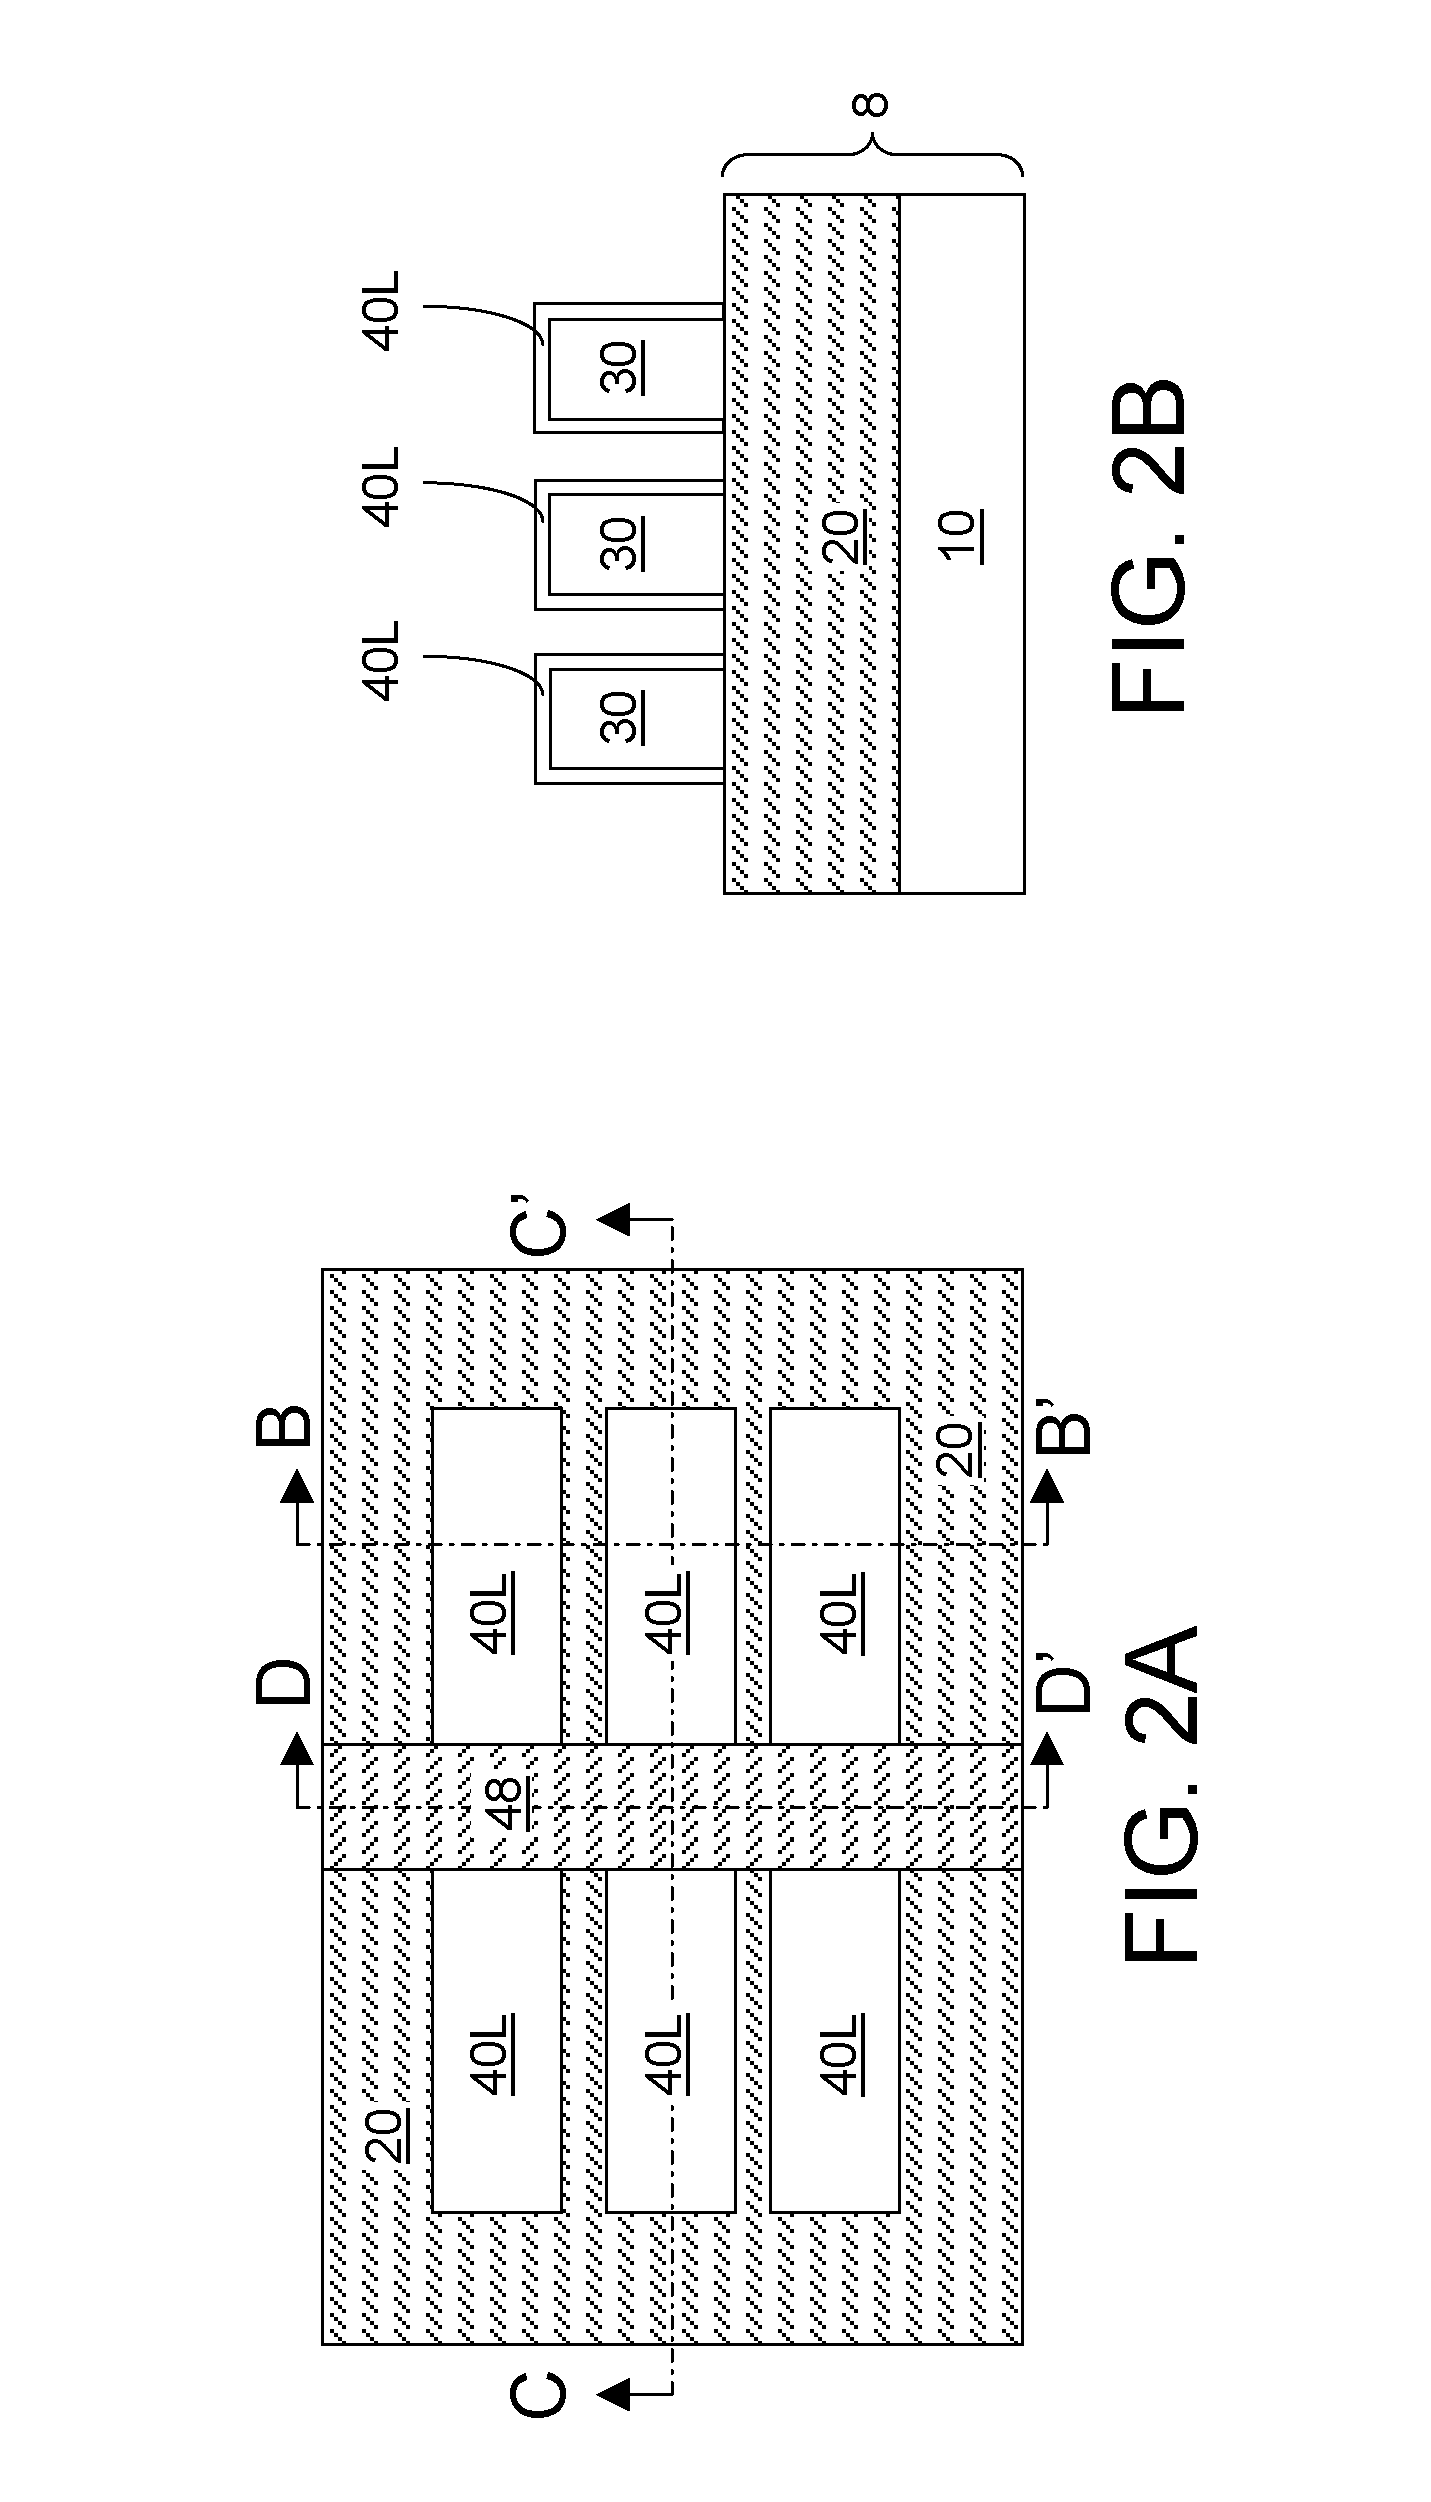 Finfet with longitudinal stress in a channel